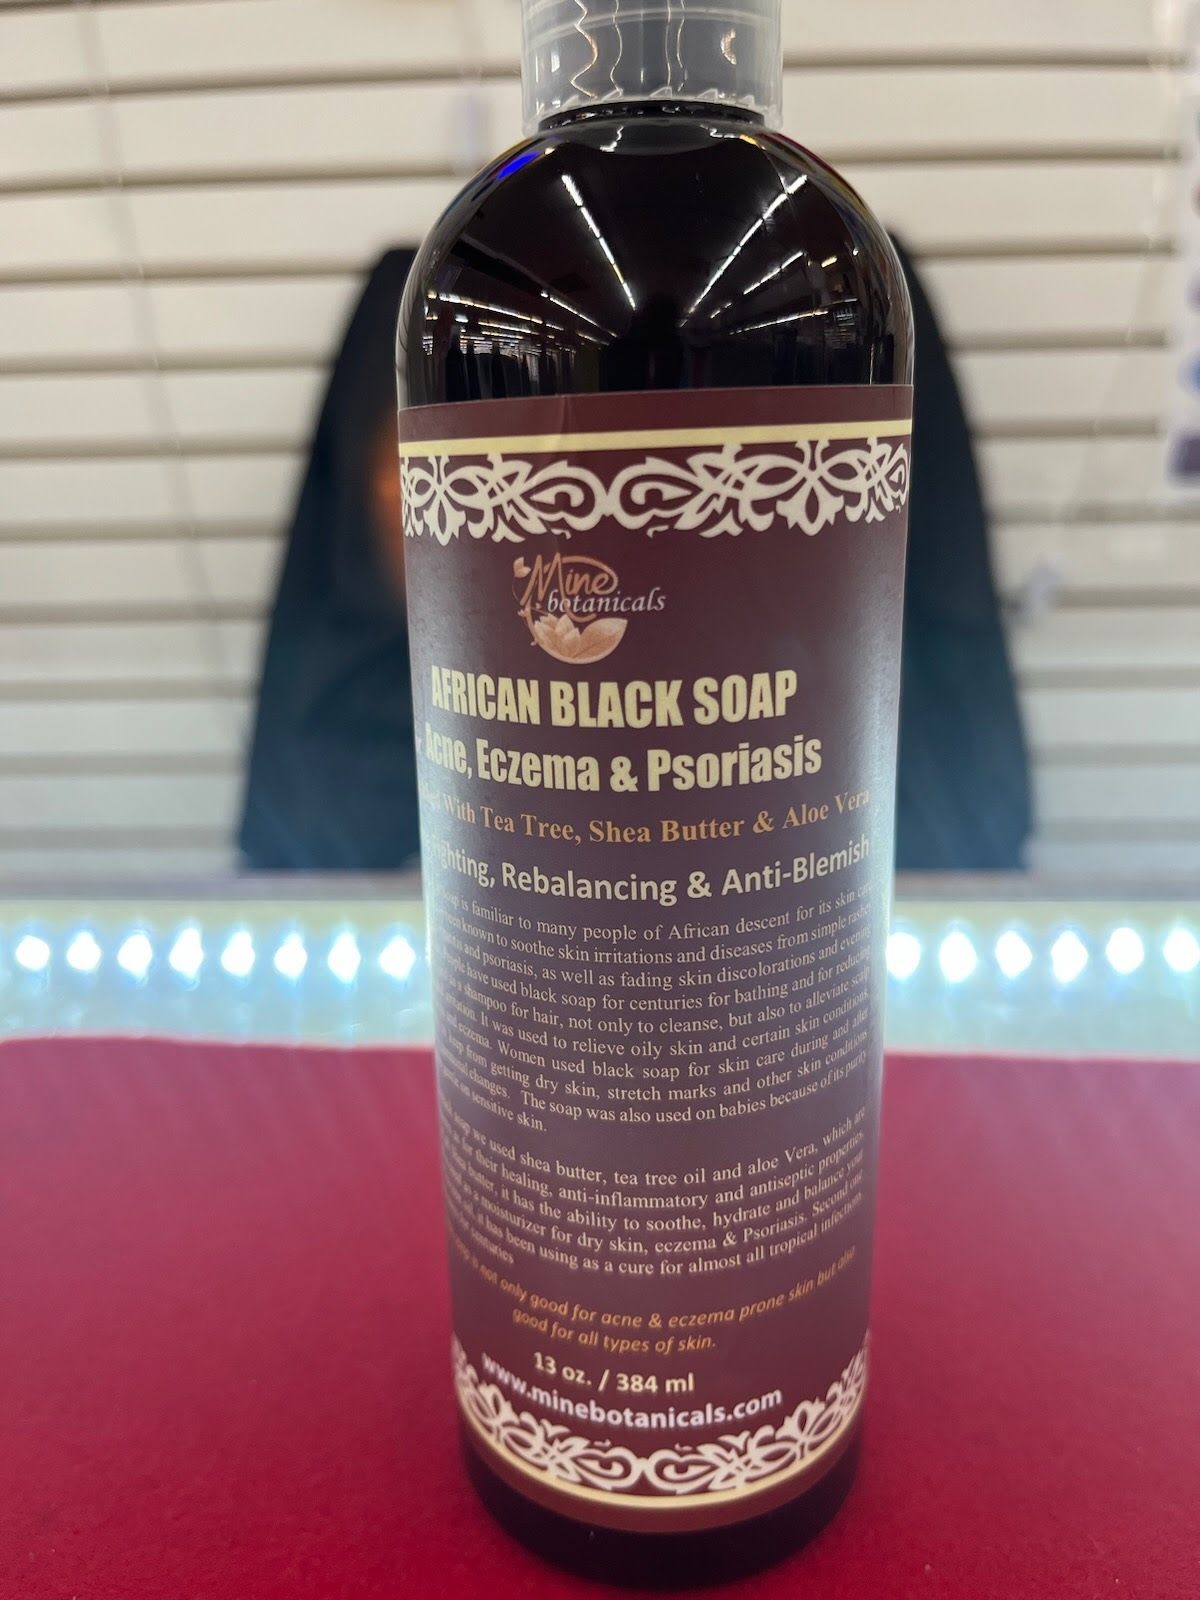 A bottle of black soap sitting on top of a table.